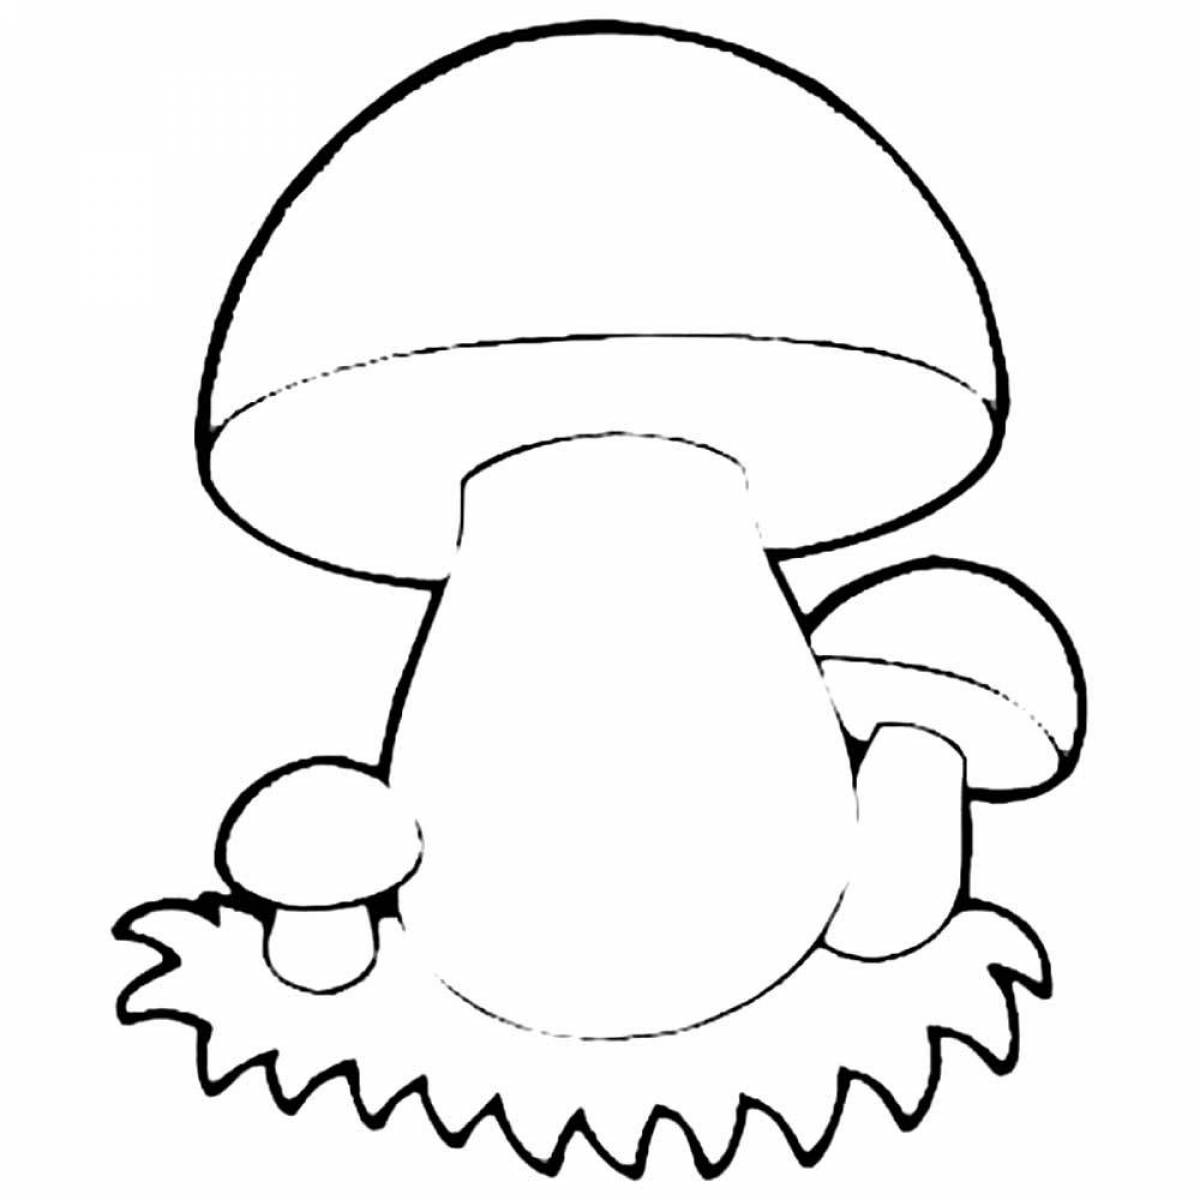 Awesome mushroom coloring pages for kids